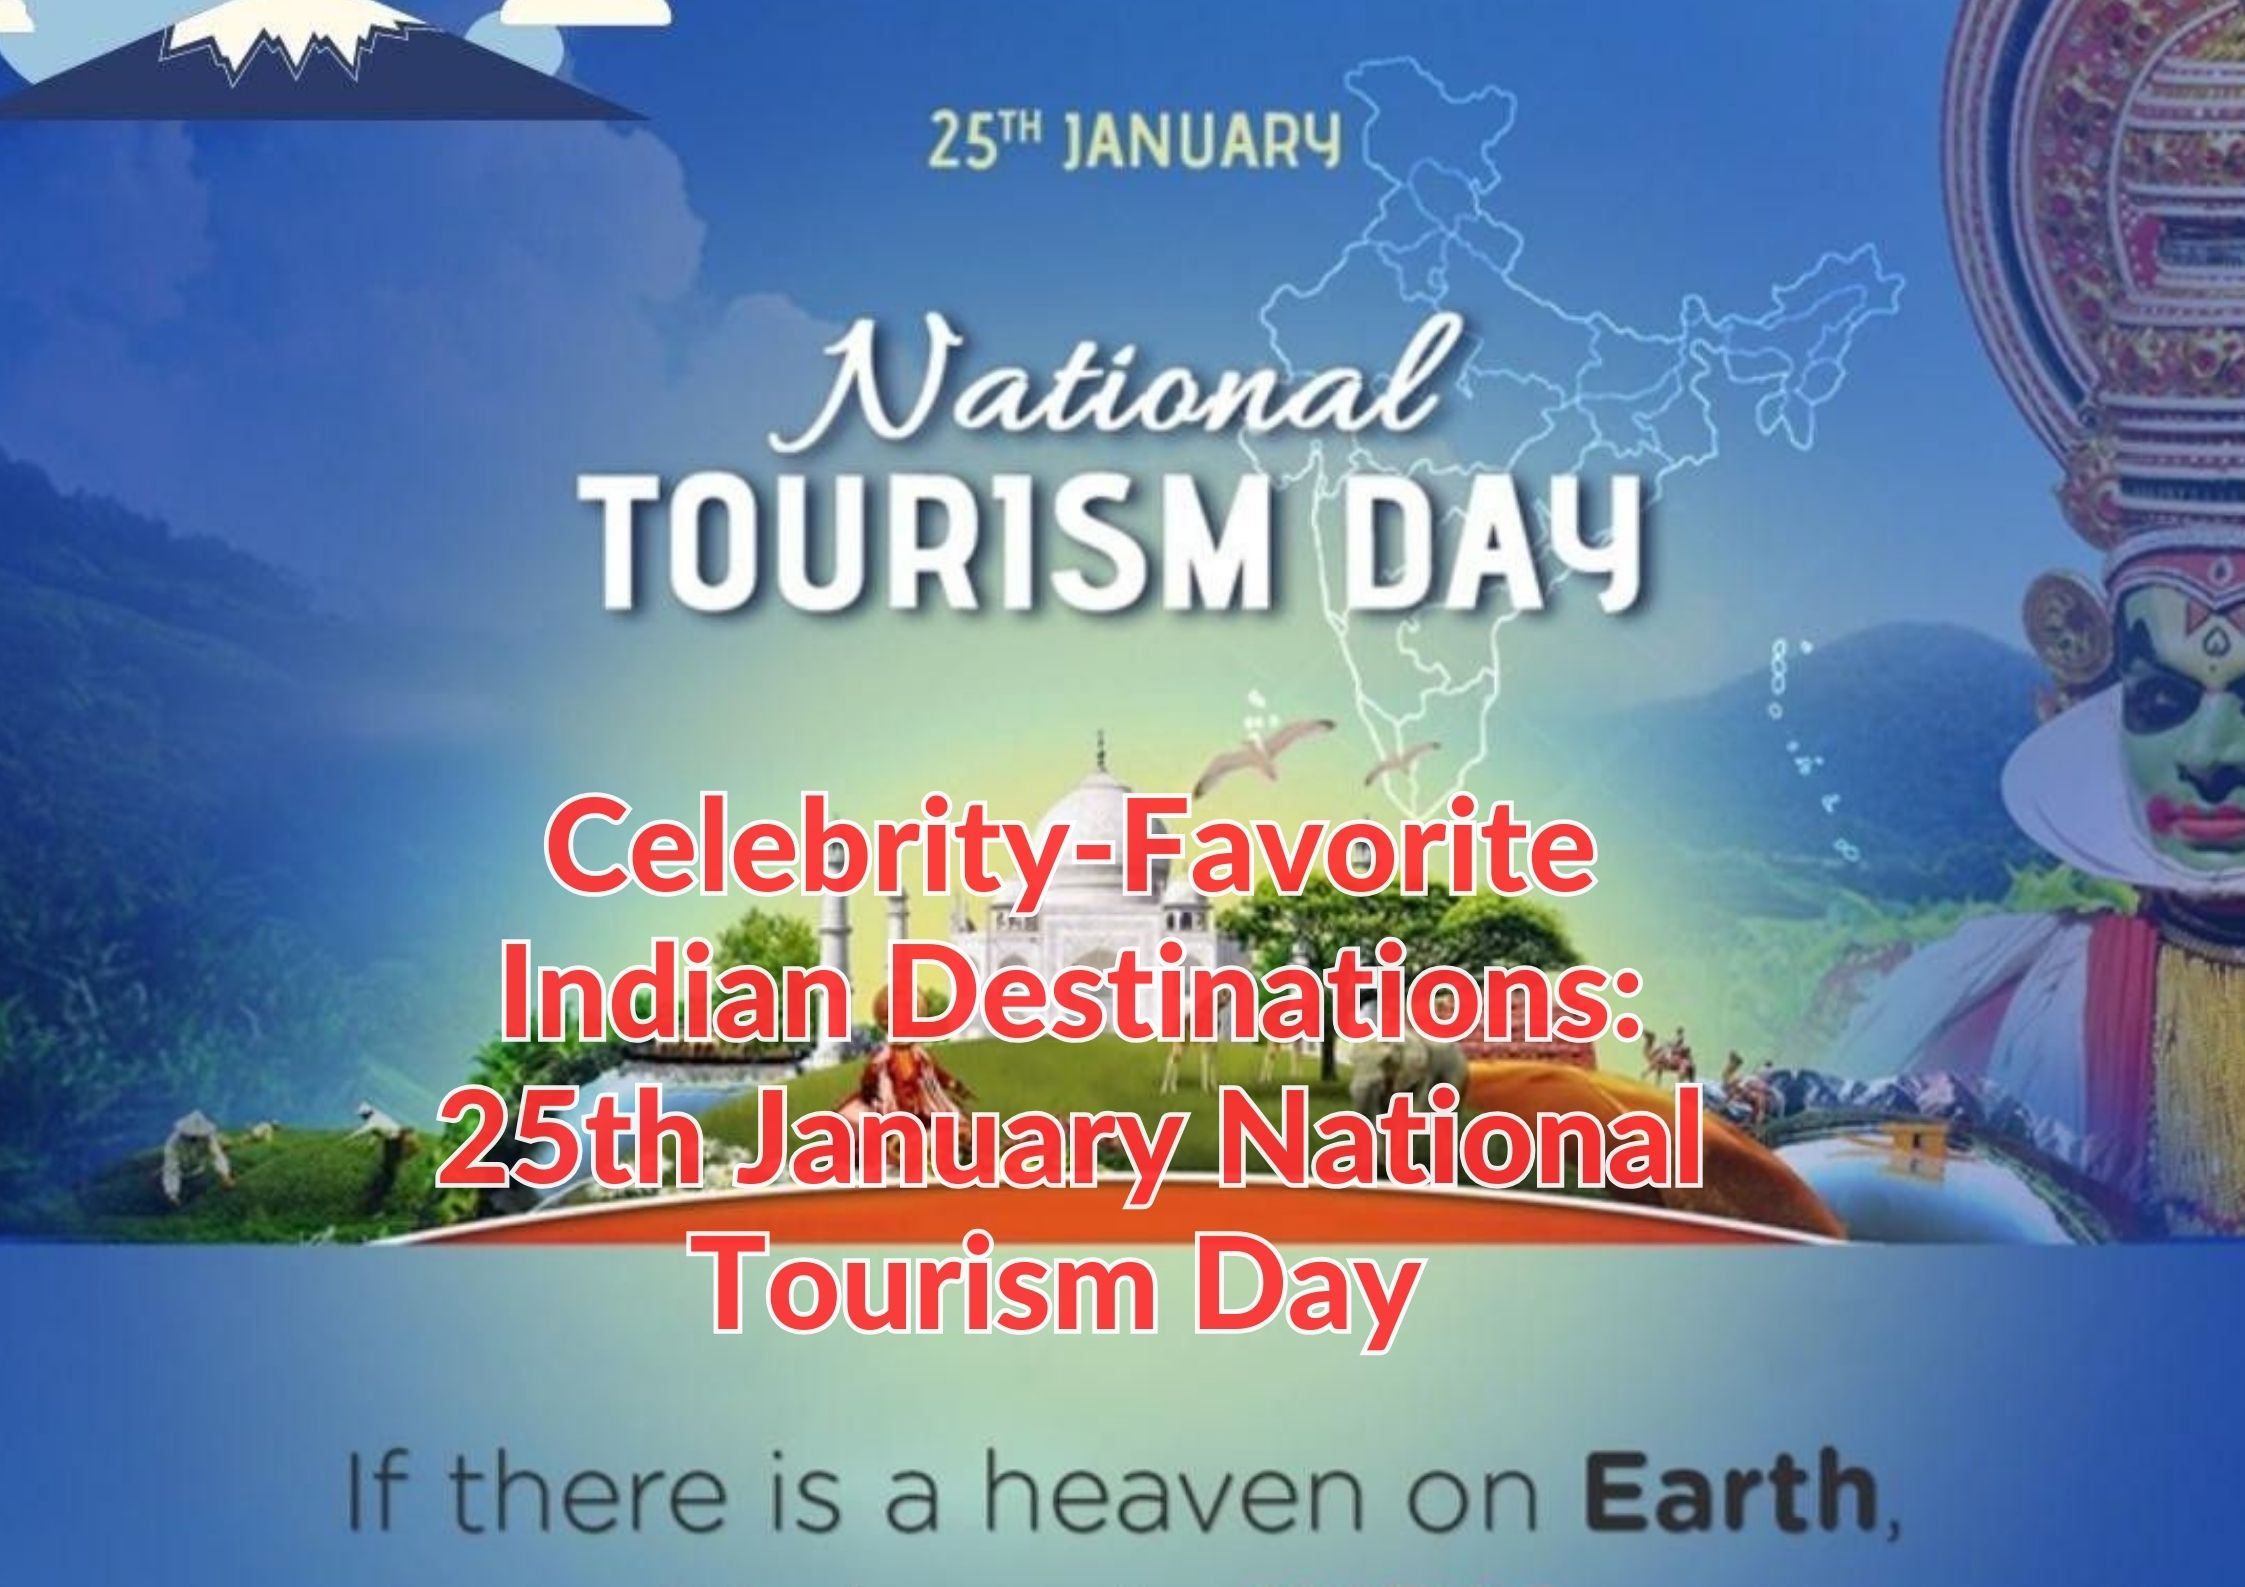 Celebrity-Favorite Indian Destinations: 25th January National Tourism Day